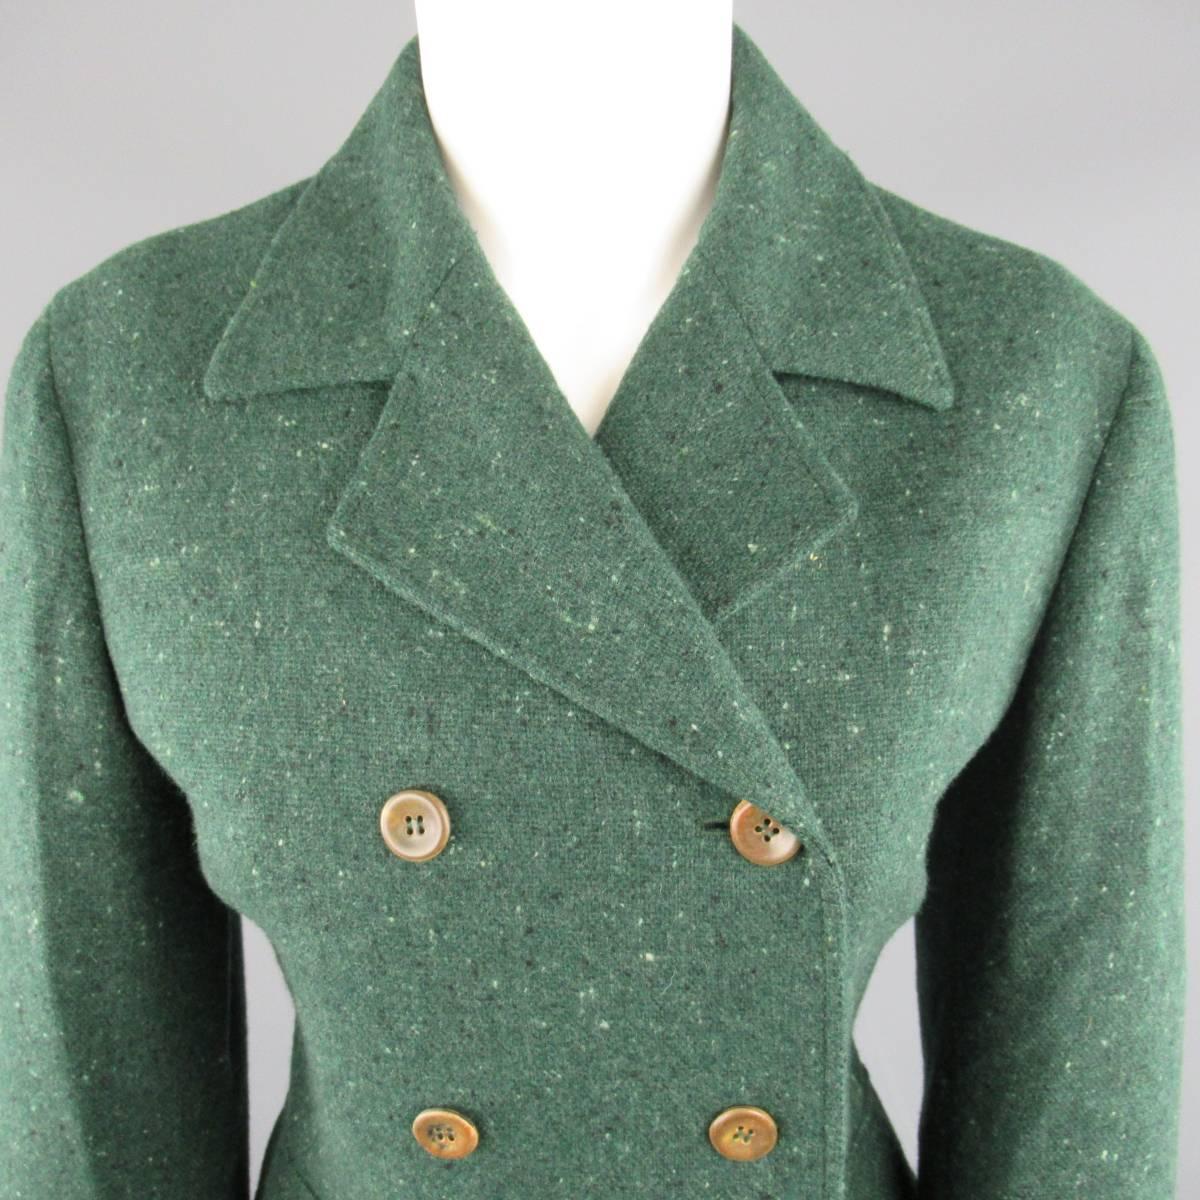 LUCIANO BARBERA double breasted peacoat comes in a speckled green wool and features a classic pointed lapel, wooden buttons, cuffed sleeves, and simulated flap pockets. Made in Italy.

Excellent Pre-Owned Condition.
Marked: US